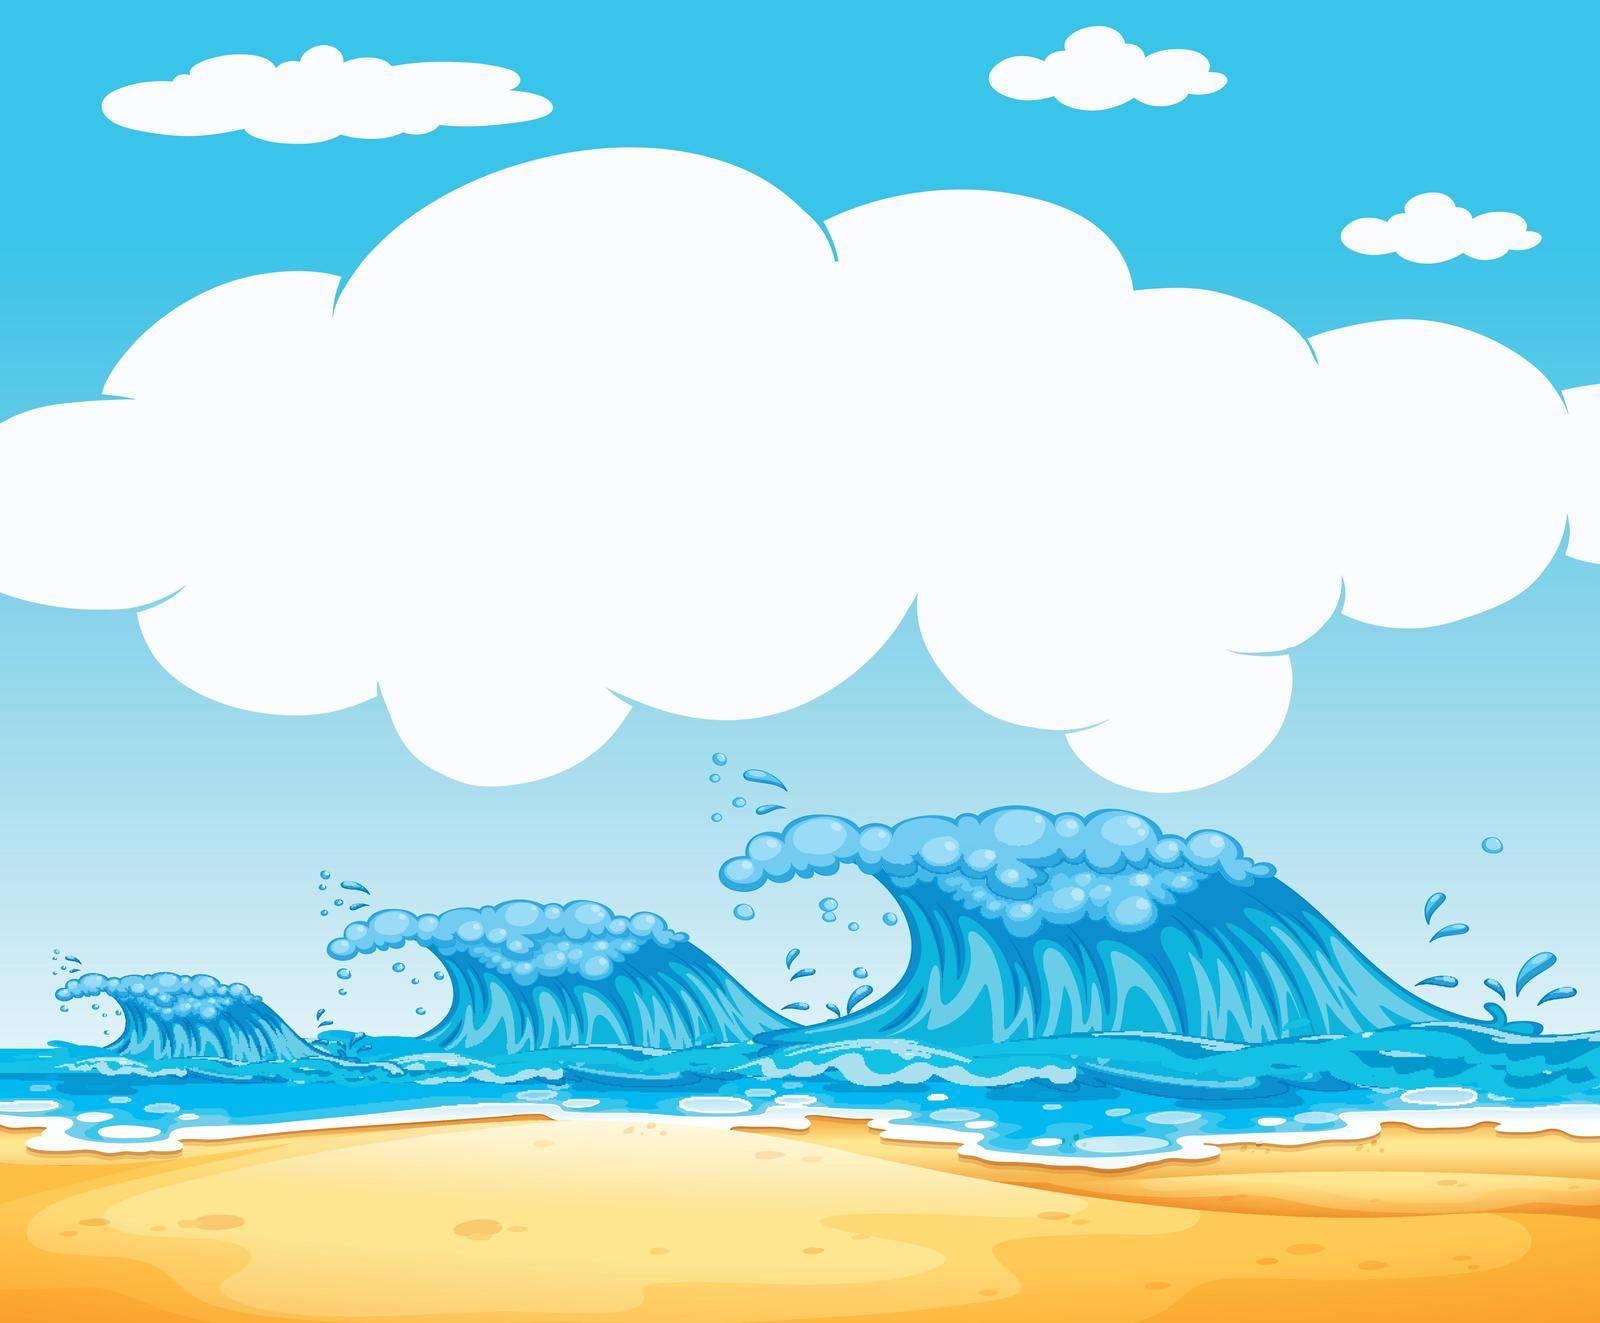 Ocean with waves background illustration